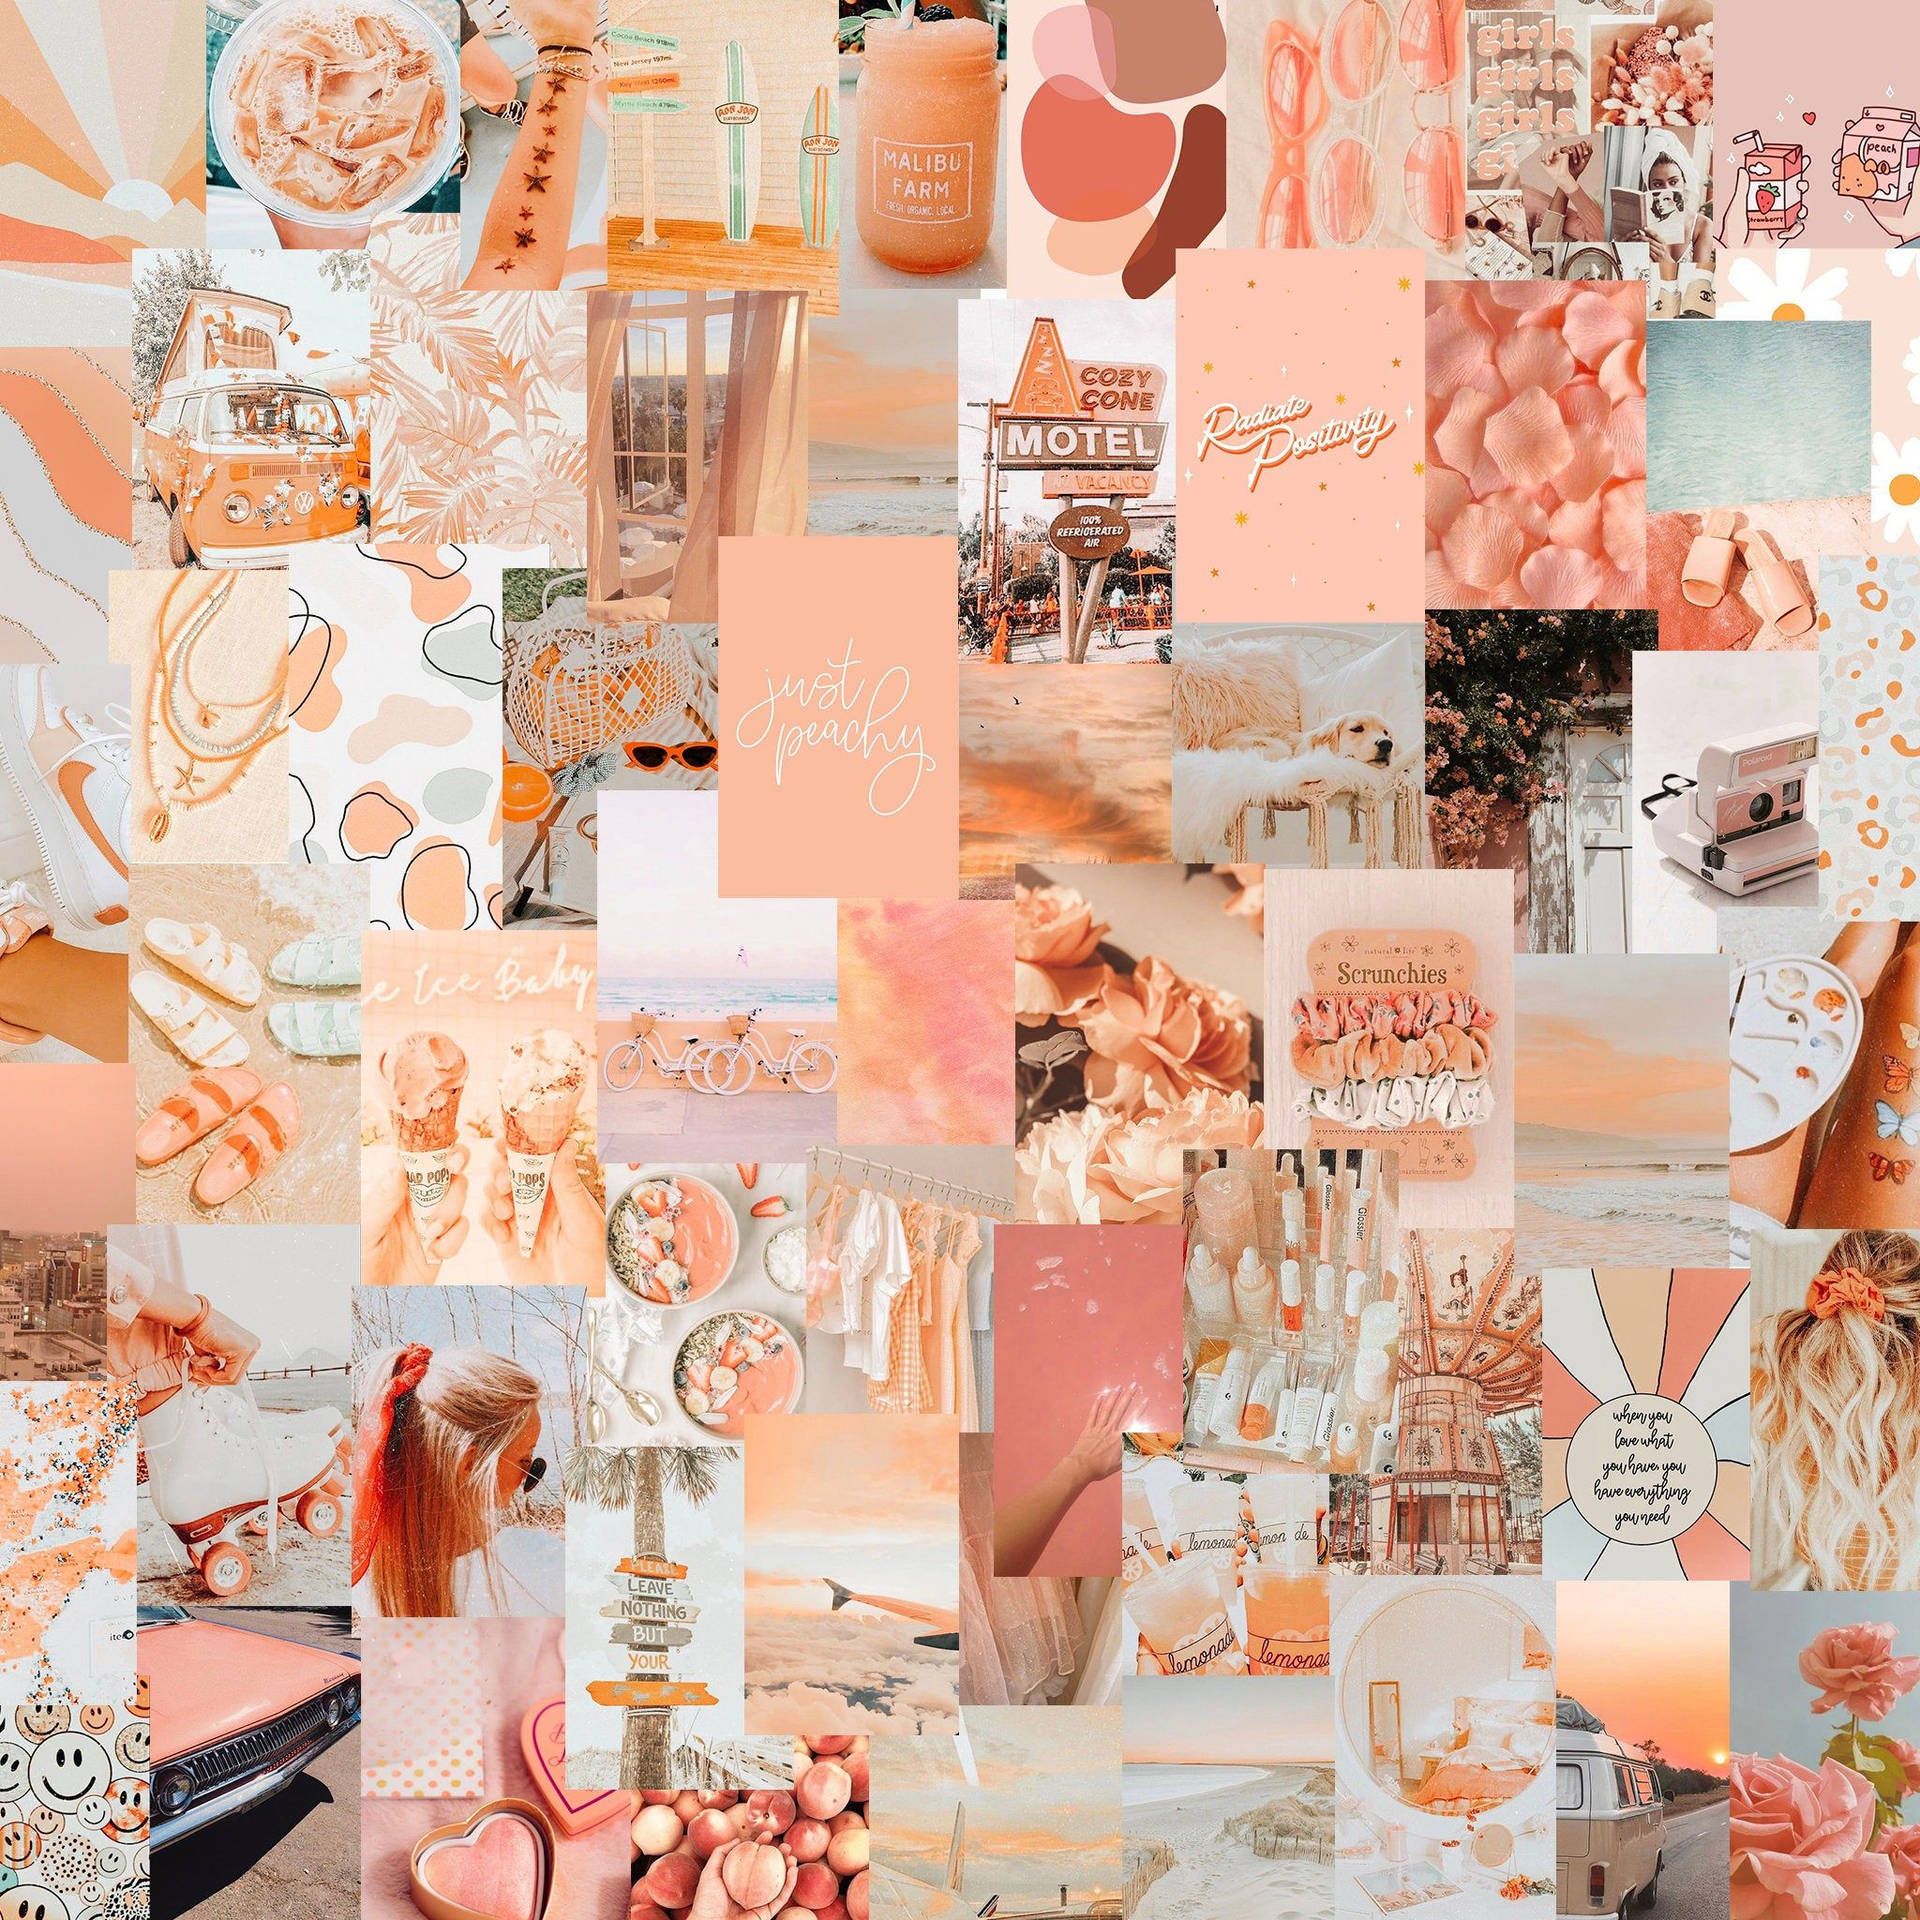 Download Peach Aesthetic Collage With Orange Tones Wallpaper